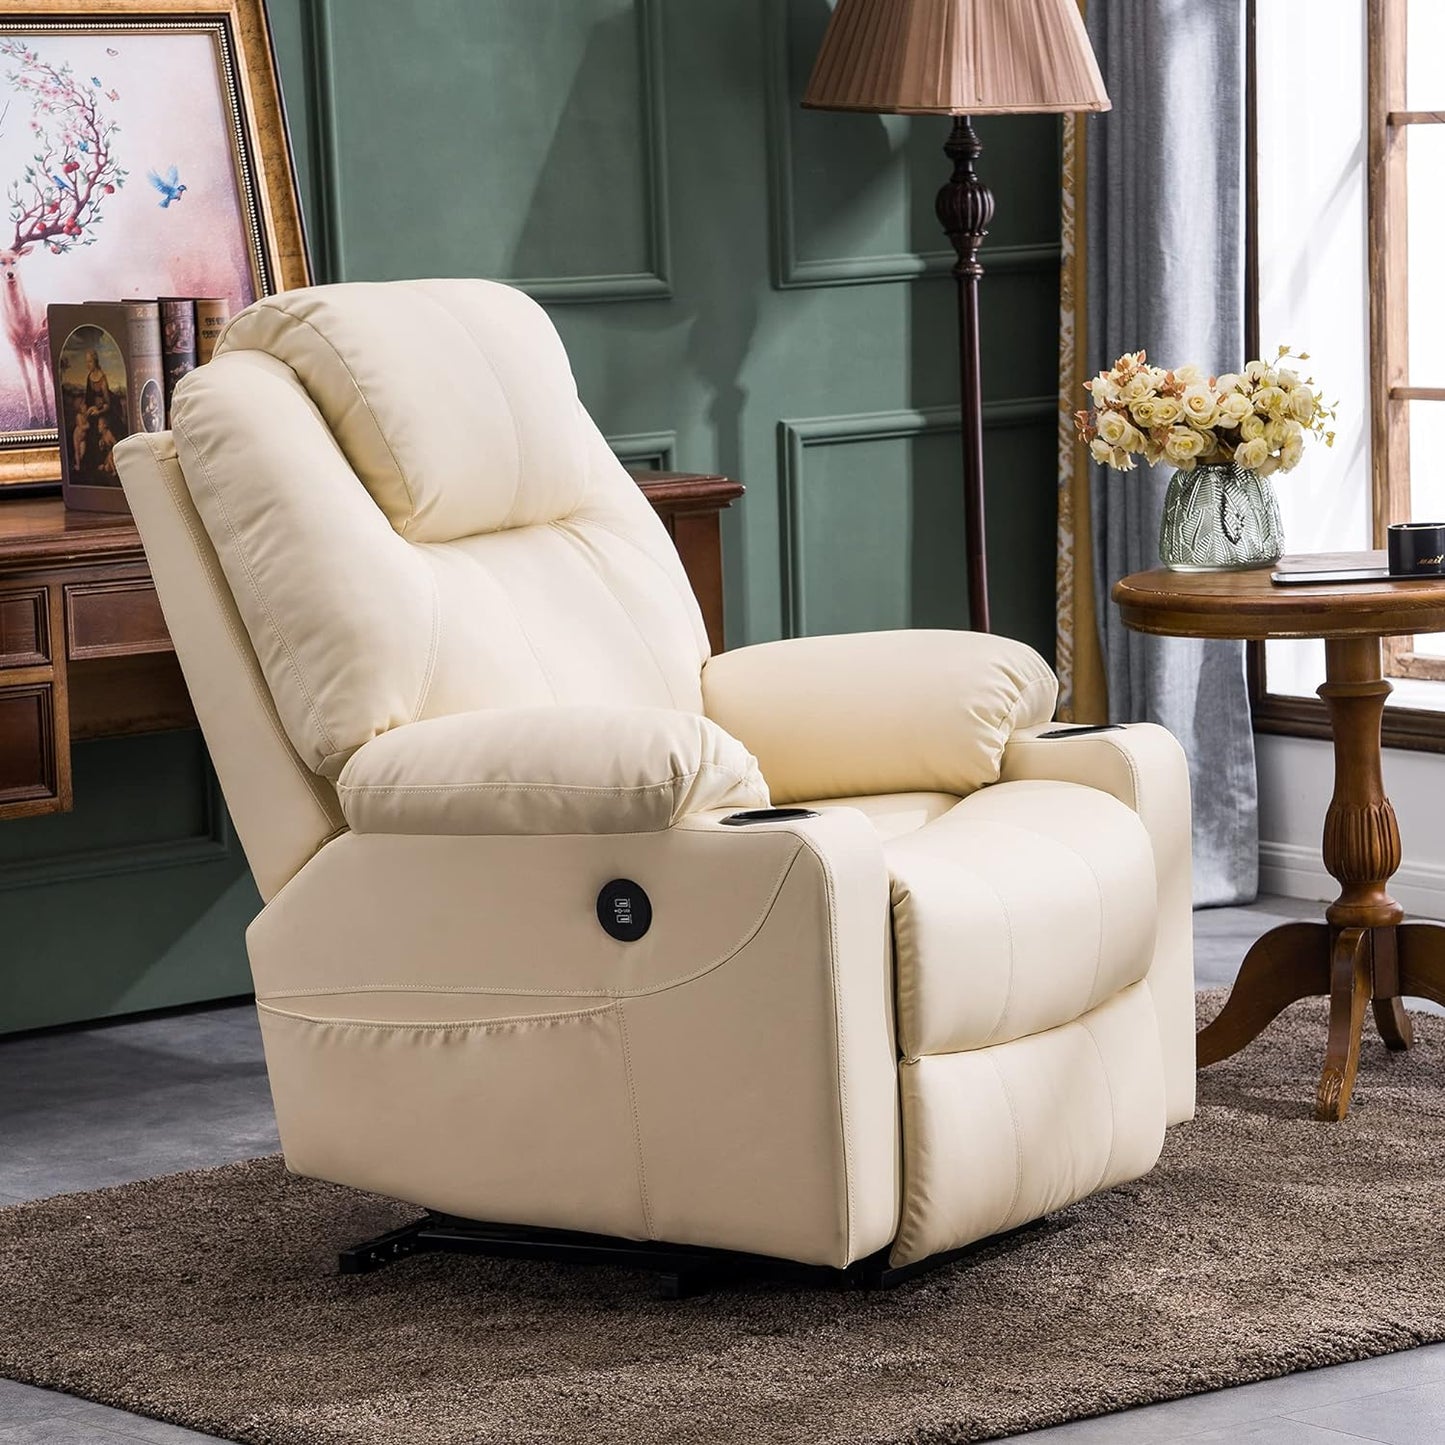 Electric Power Lift Recliner Chair Sofa with Massage and Heat for Elderly, 3 Positions, 2 Side Pockets, and Cup Holders, USB Ports, Faux Leather 7040 (Medium, Cream White)